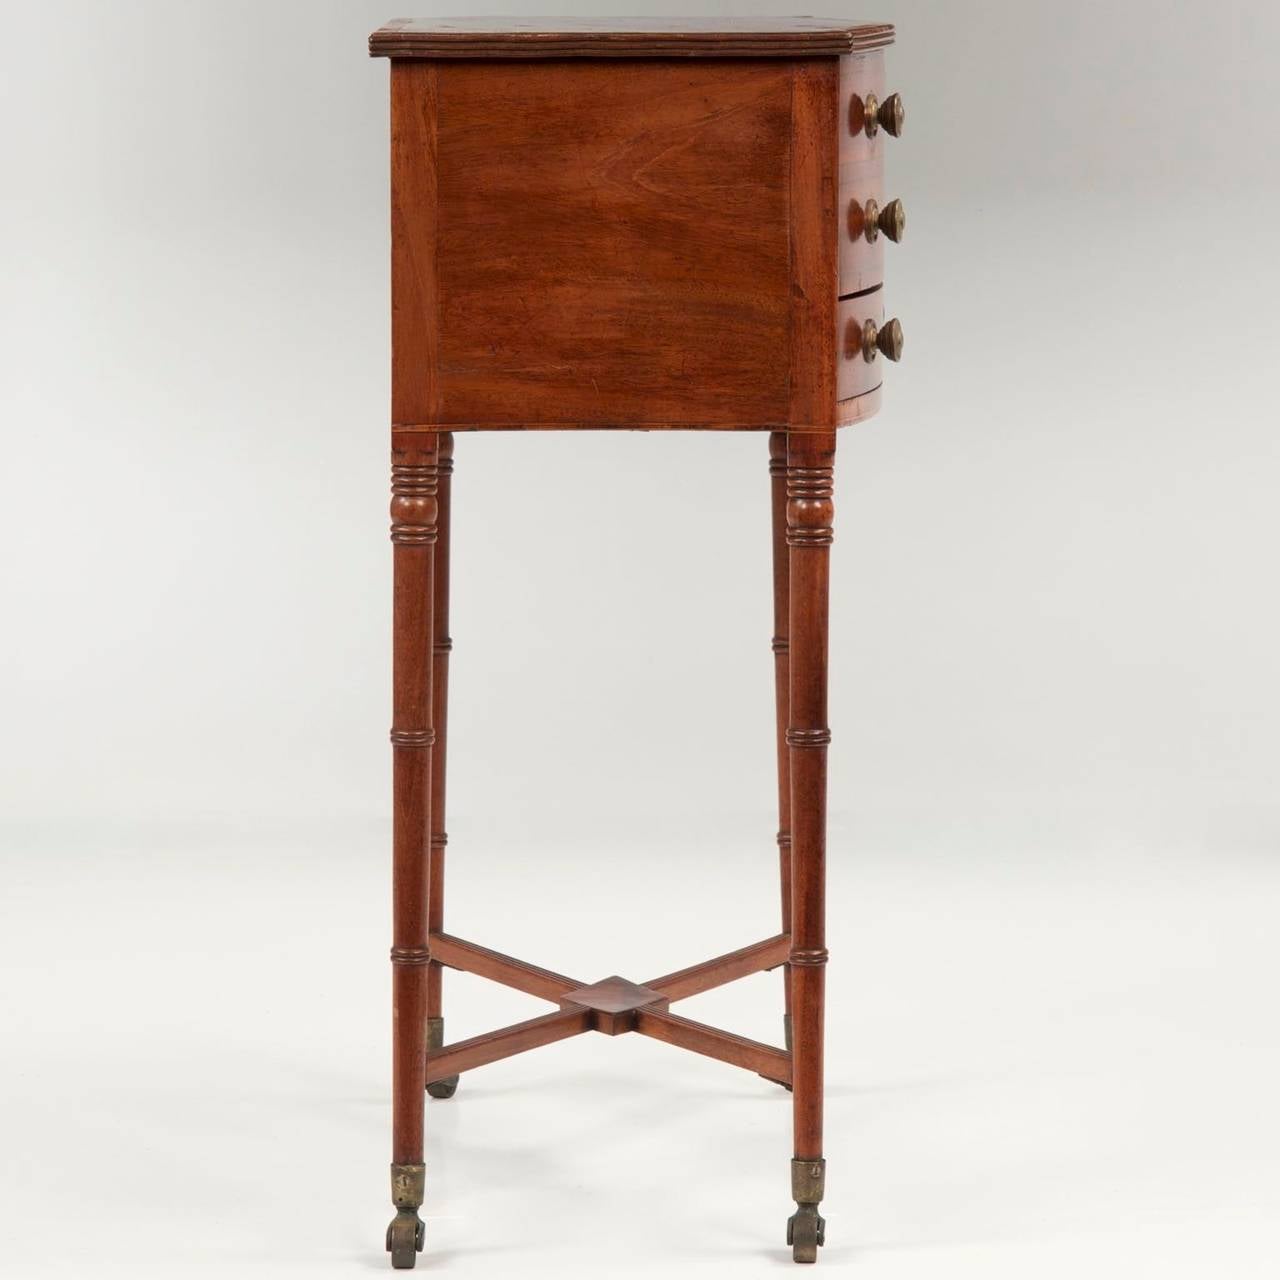 The craftsman of this fine little work table achieved perfect balance of proportions in his design, the heavy upper portion remaining remarkably light and airy against the much smaller legs.  Utilizing a reeded X-stretcher with a mahogany veneered